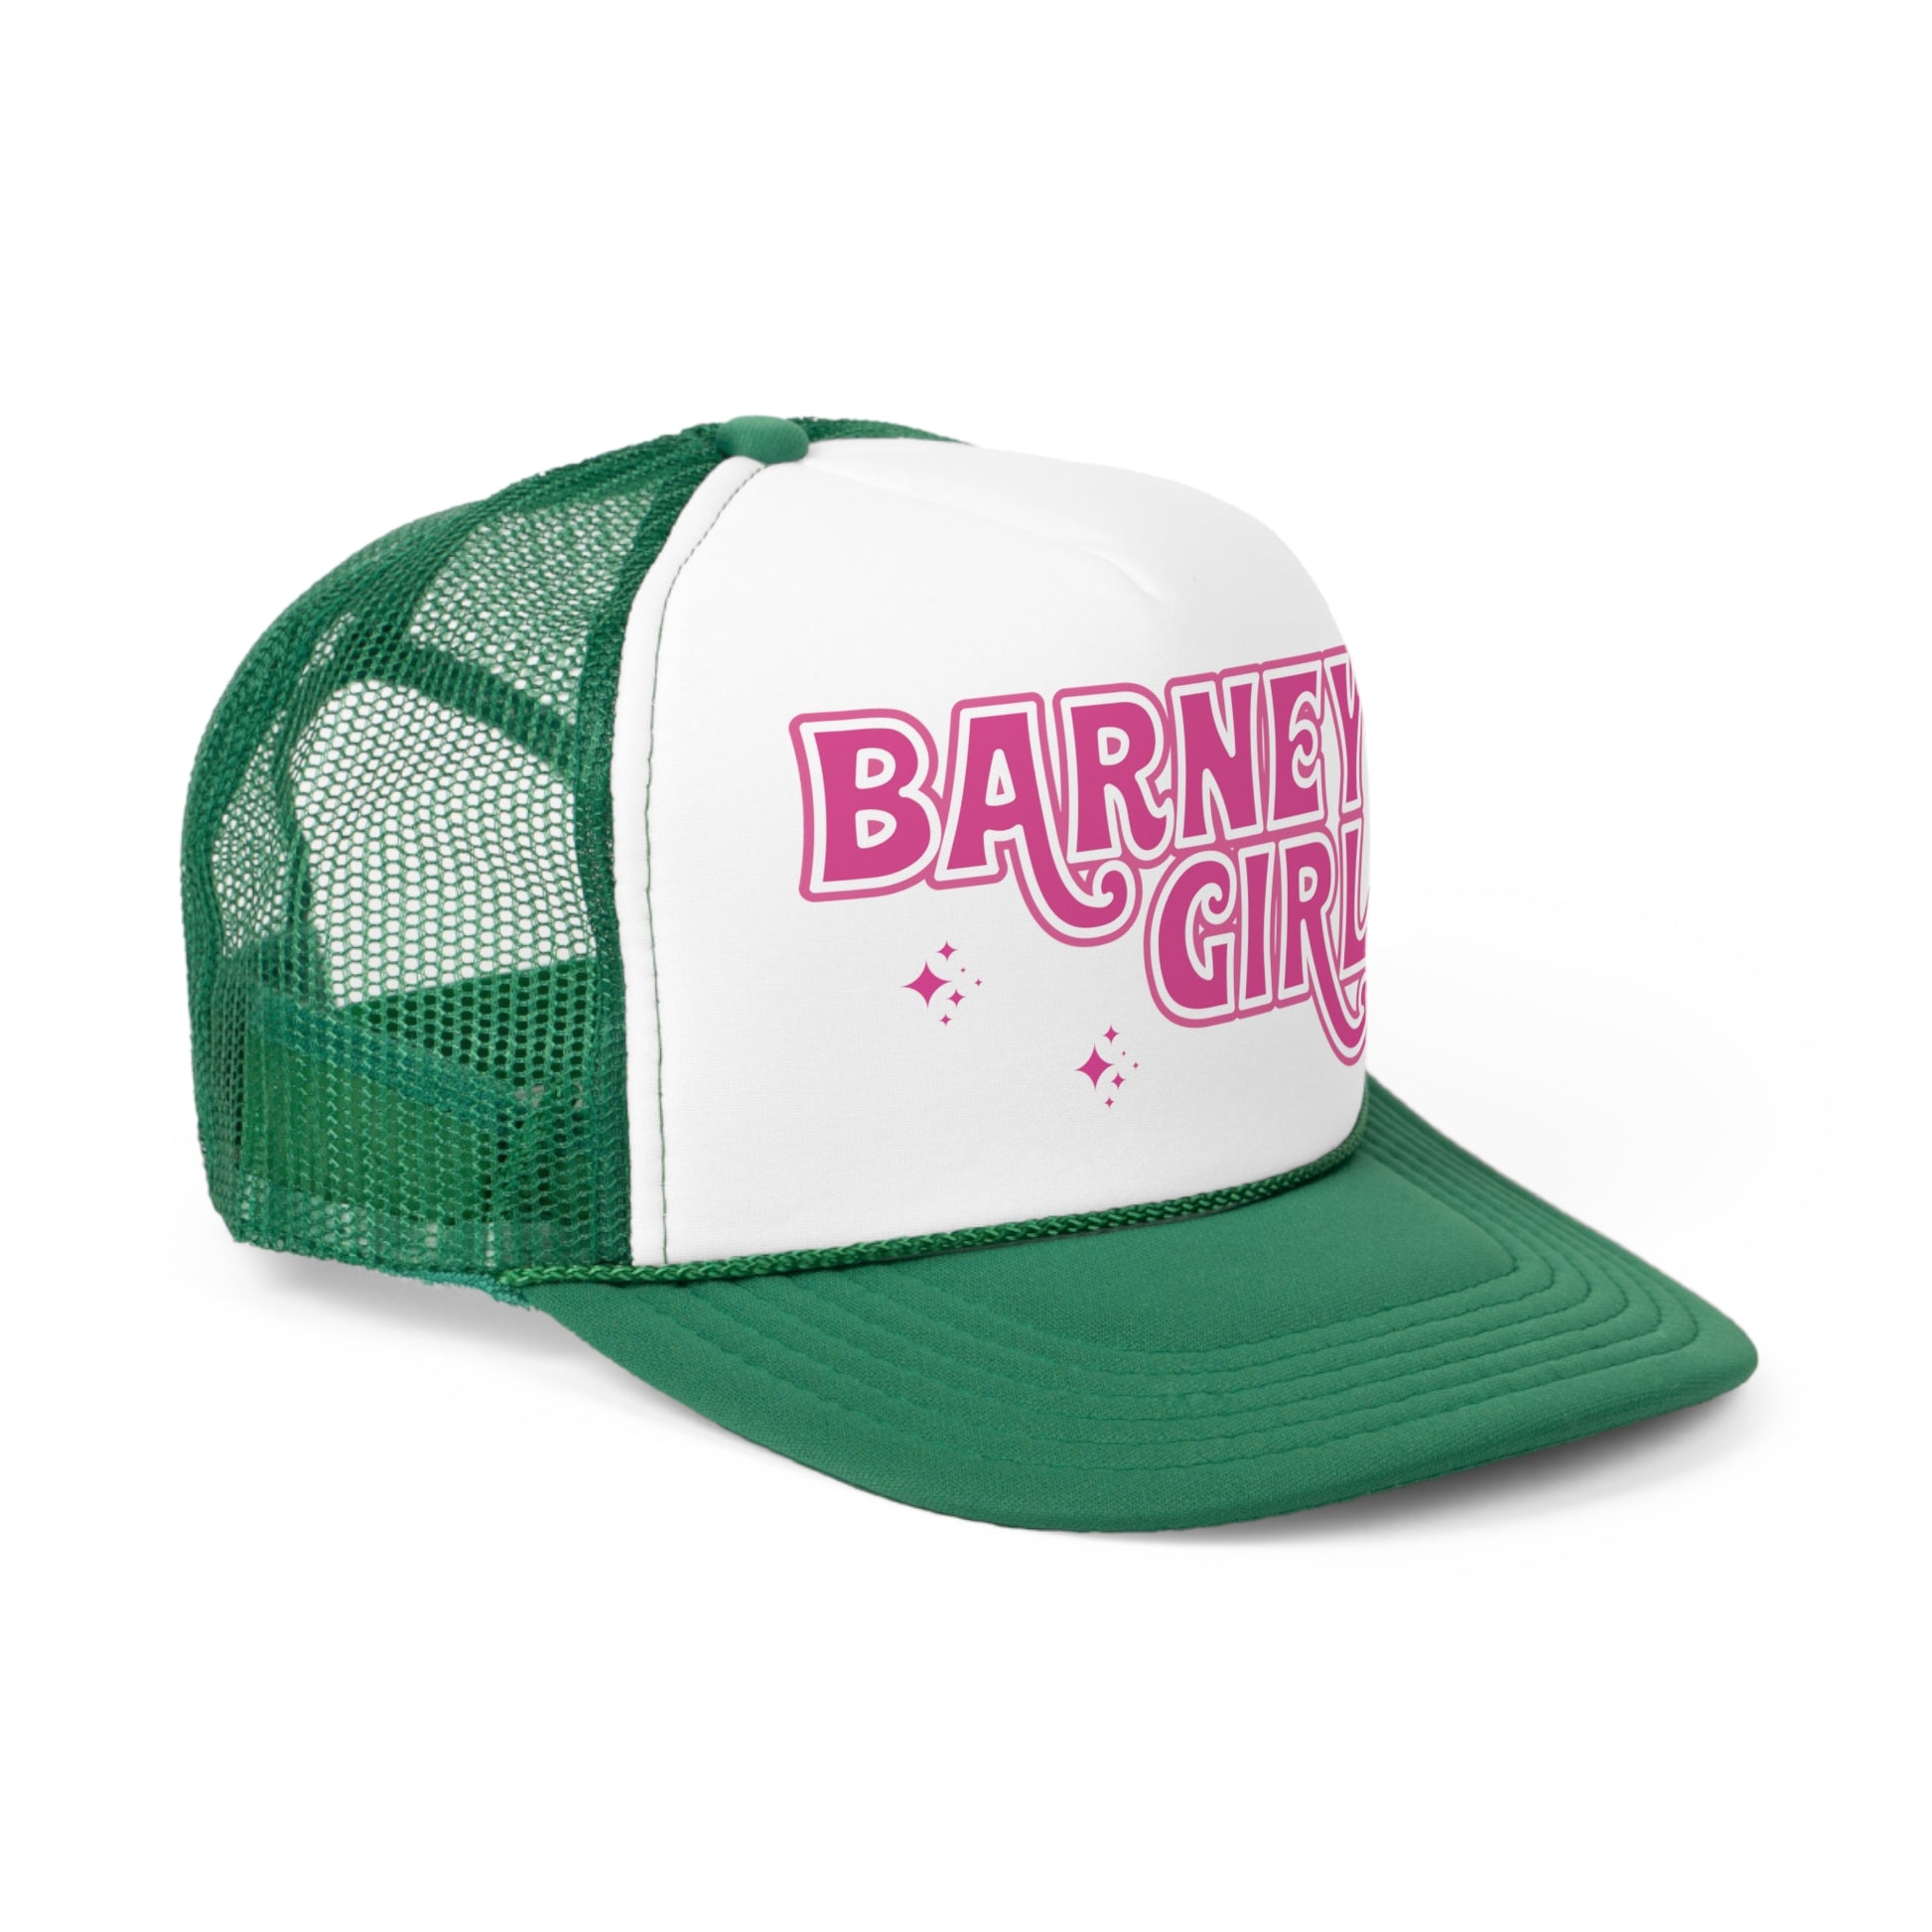 Barney's Girl | BARNEY'S BEANERY - Trucker Hat | Pink Graphic On Green And White Trucker Hat, Front Right View